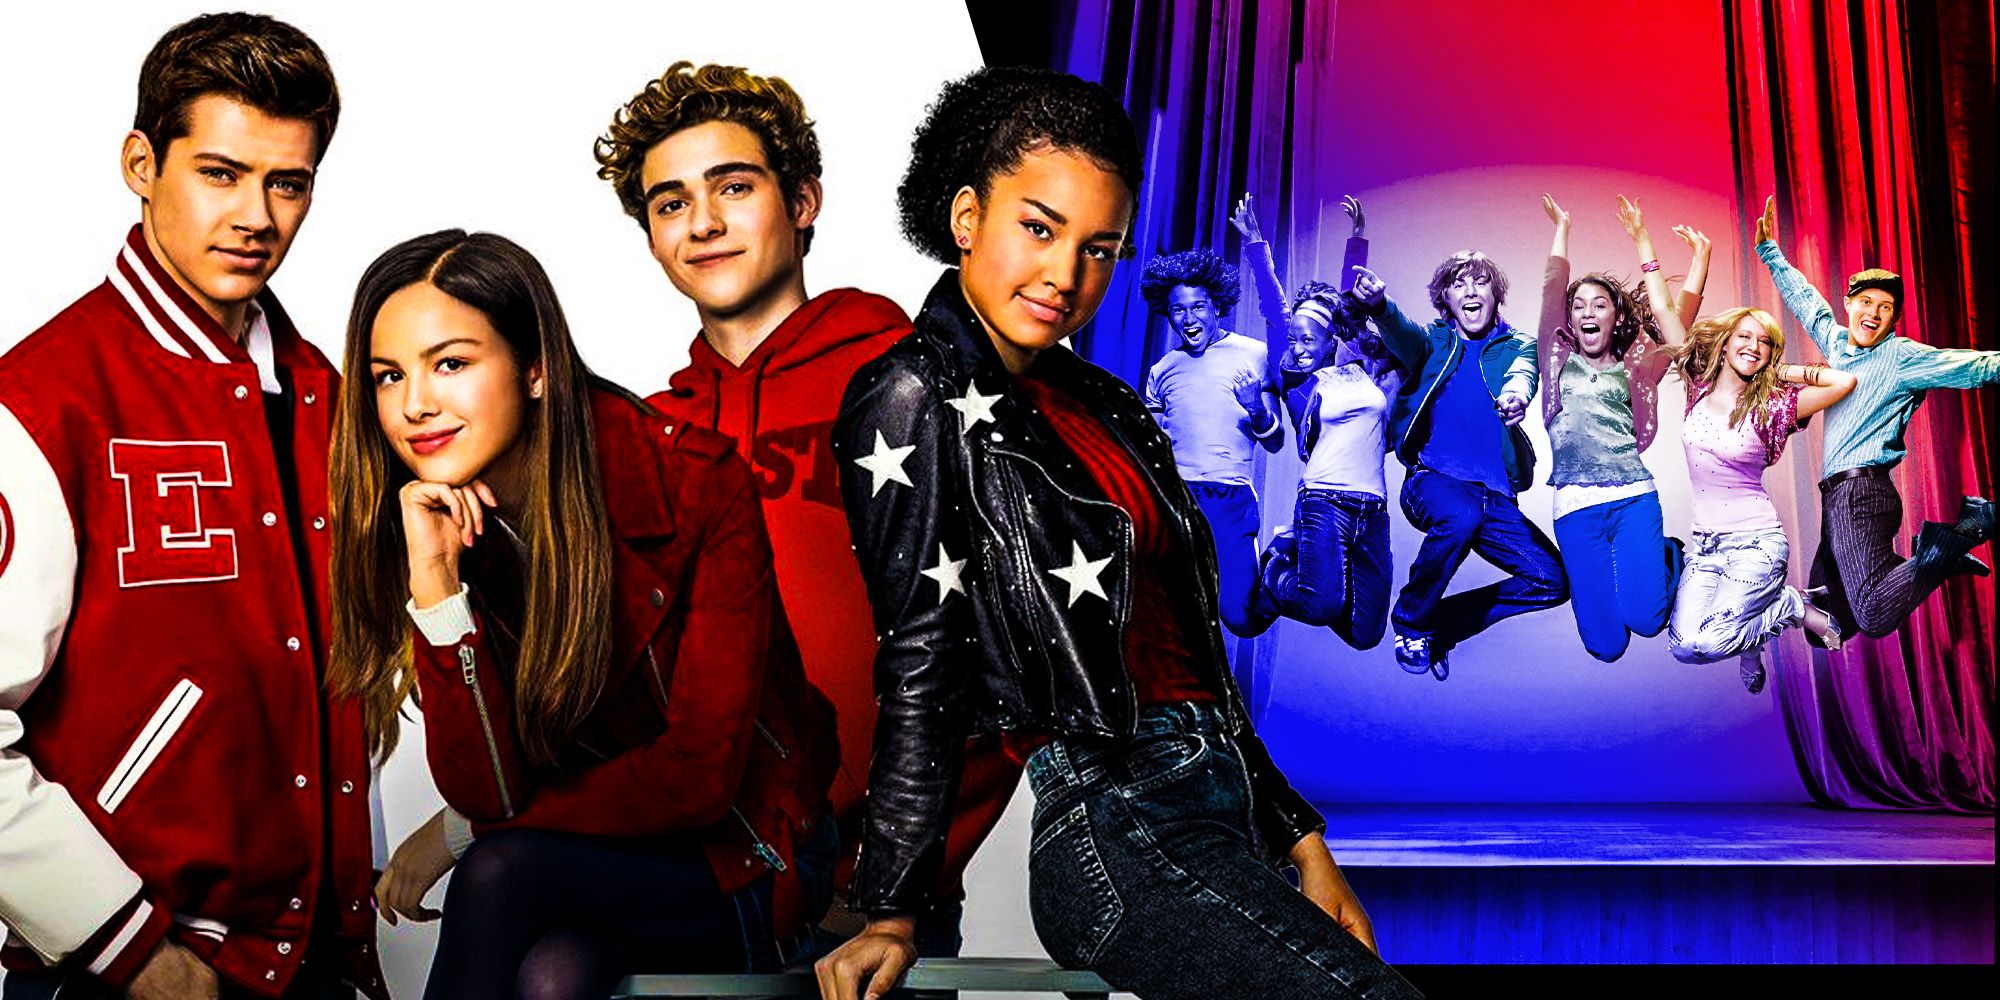 Disney’s High School Musical Show Is Better Without The Movie Connections